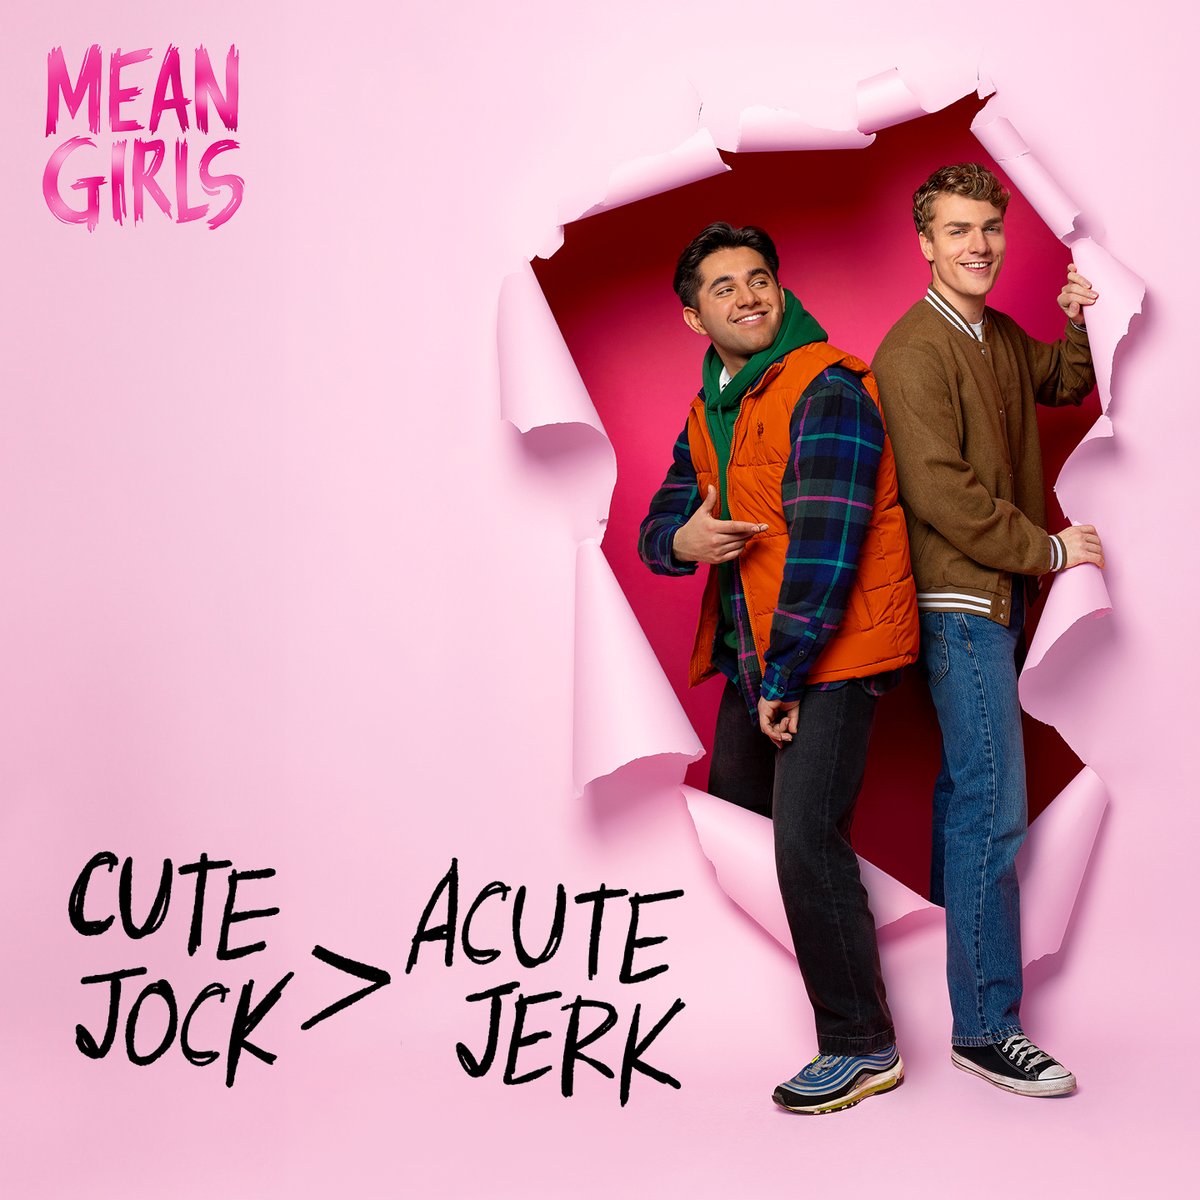 @DanielCBravo is Aaron, @luccac_p is Kevin G ...who wants to sit with them?! #MeanGirlsUK opens at the @SavoyTheatreLdn from June. Book now! 🎟️atgtix.co/3TDh4gb [3/3]